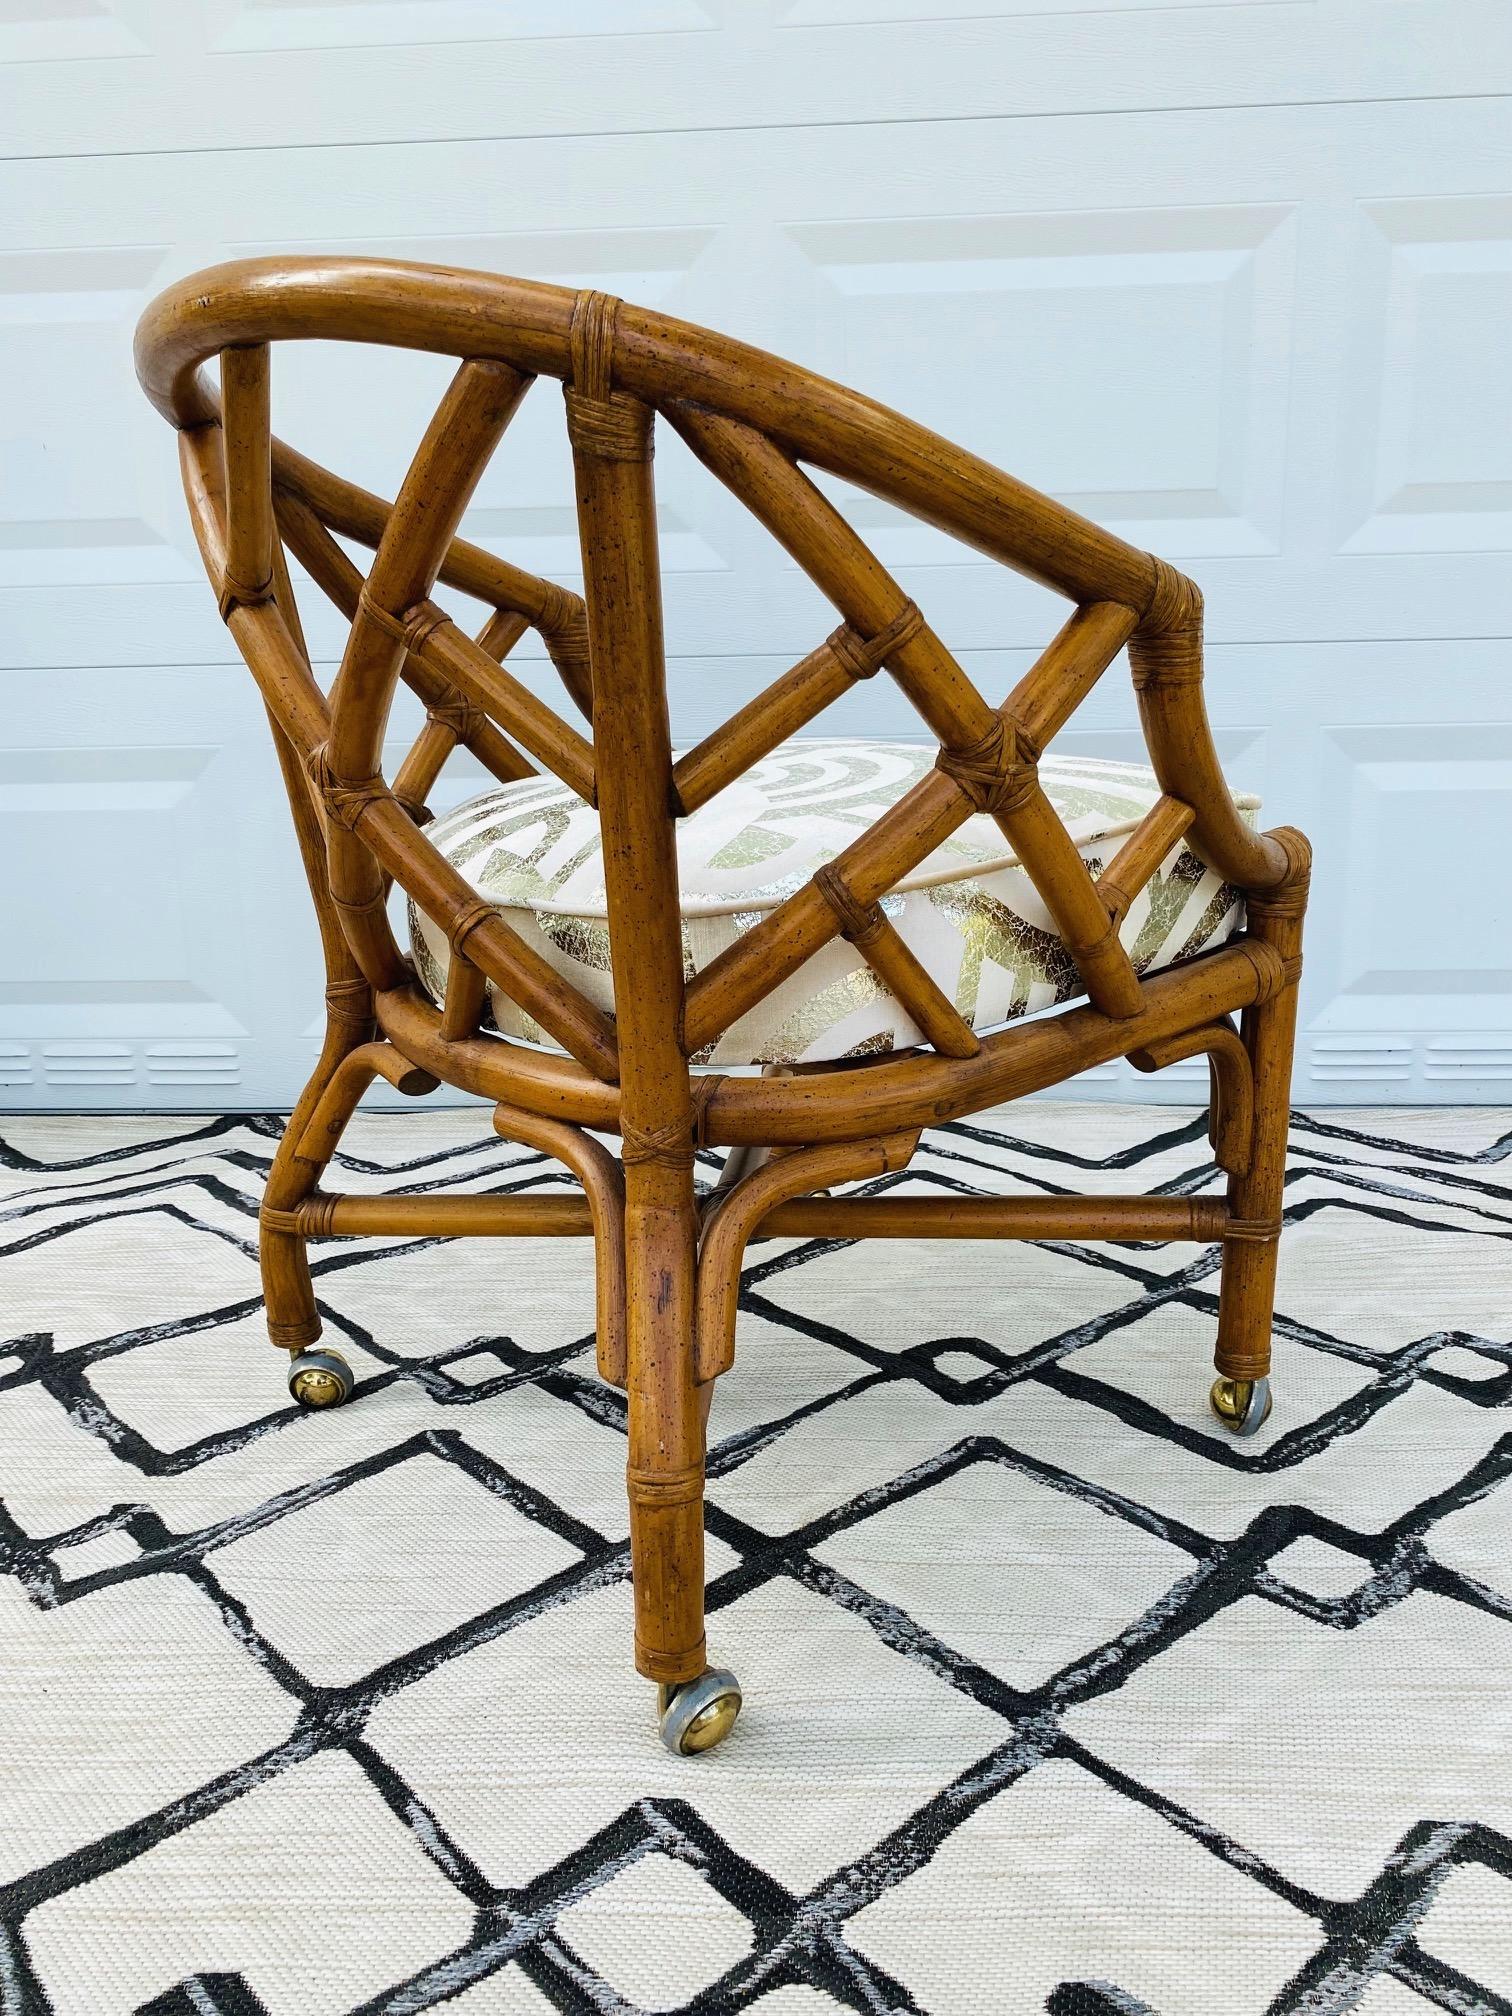 Hand-Crafted Bamboo and Rattan Chippendale Chair Upholstered in Pierre Frey Velvet, c. 1970's